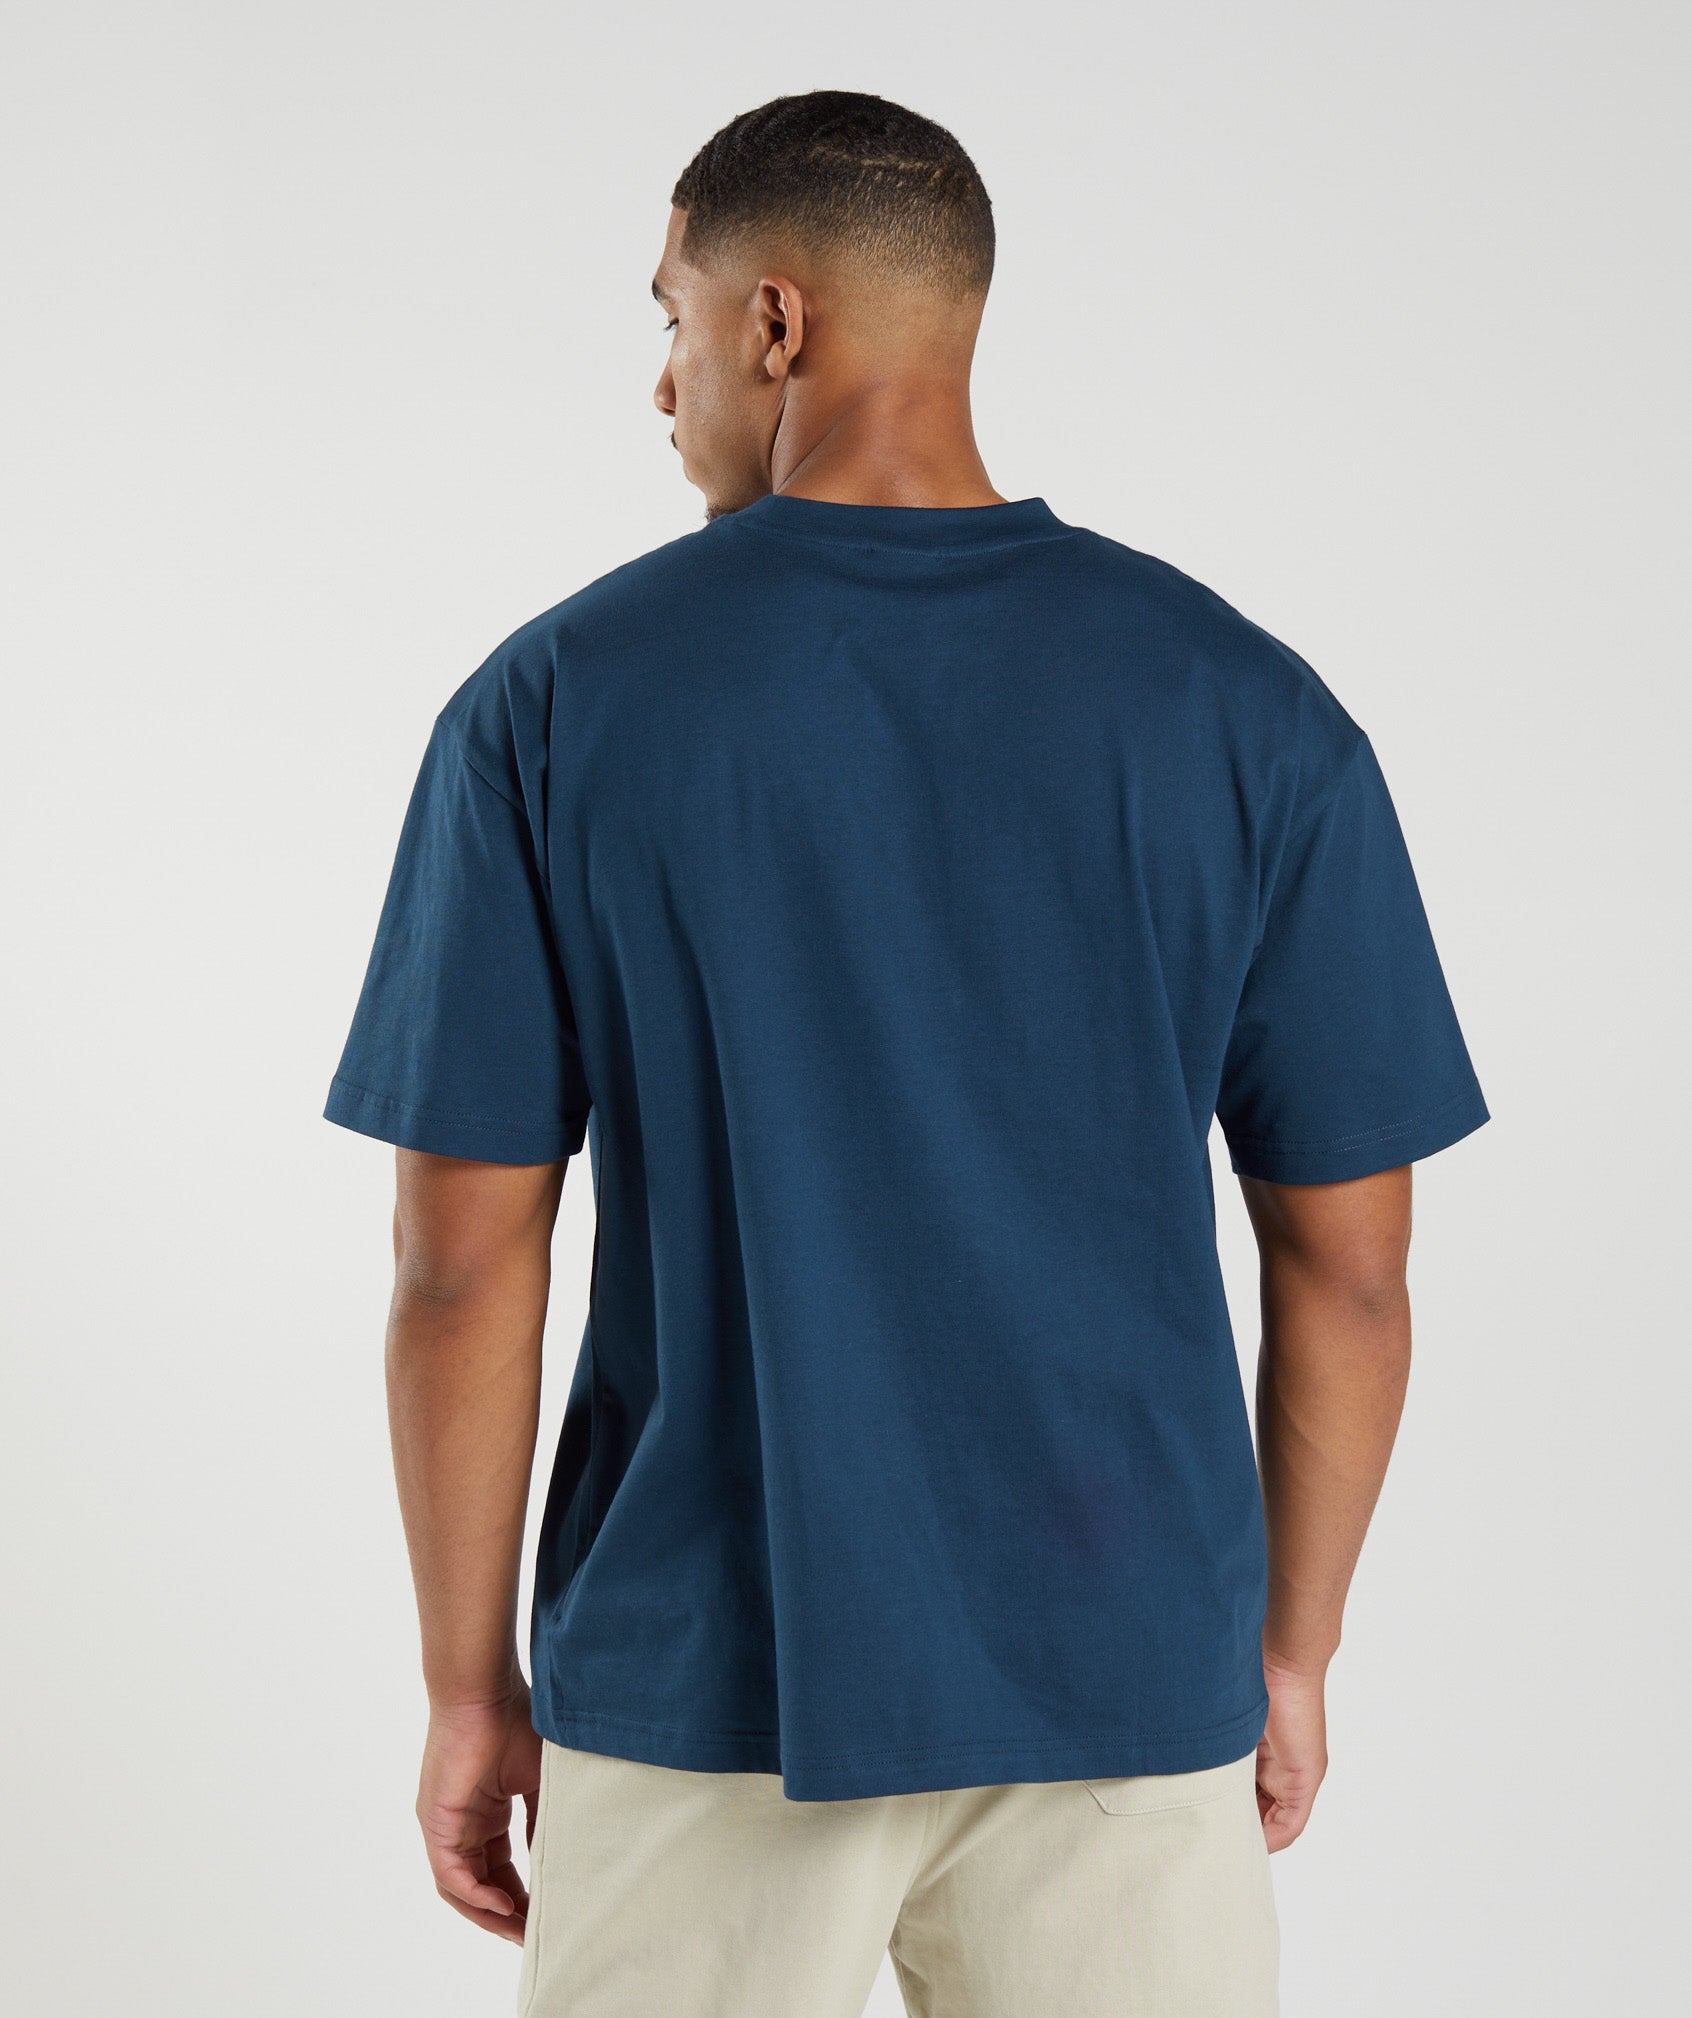 Rest Day Sweats T-Shirt in Navy - view 3